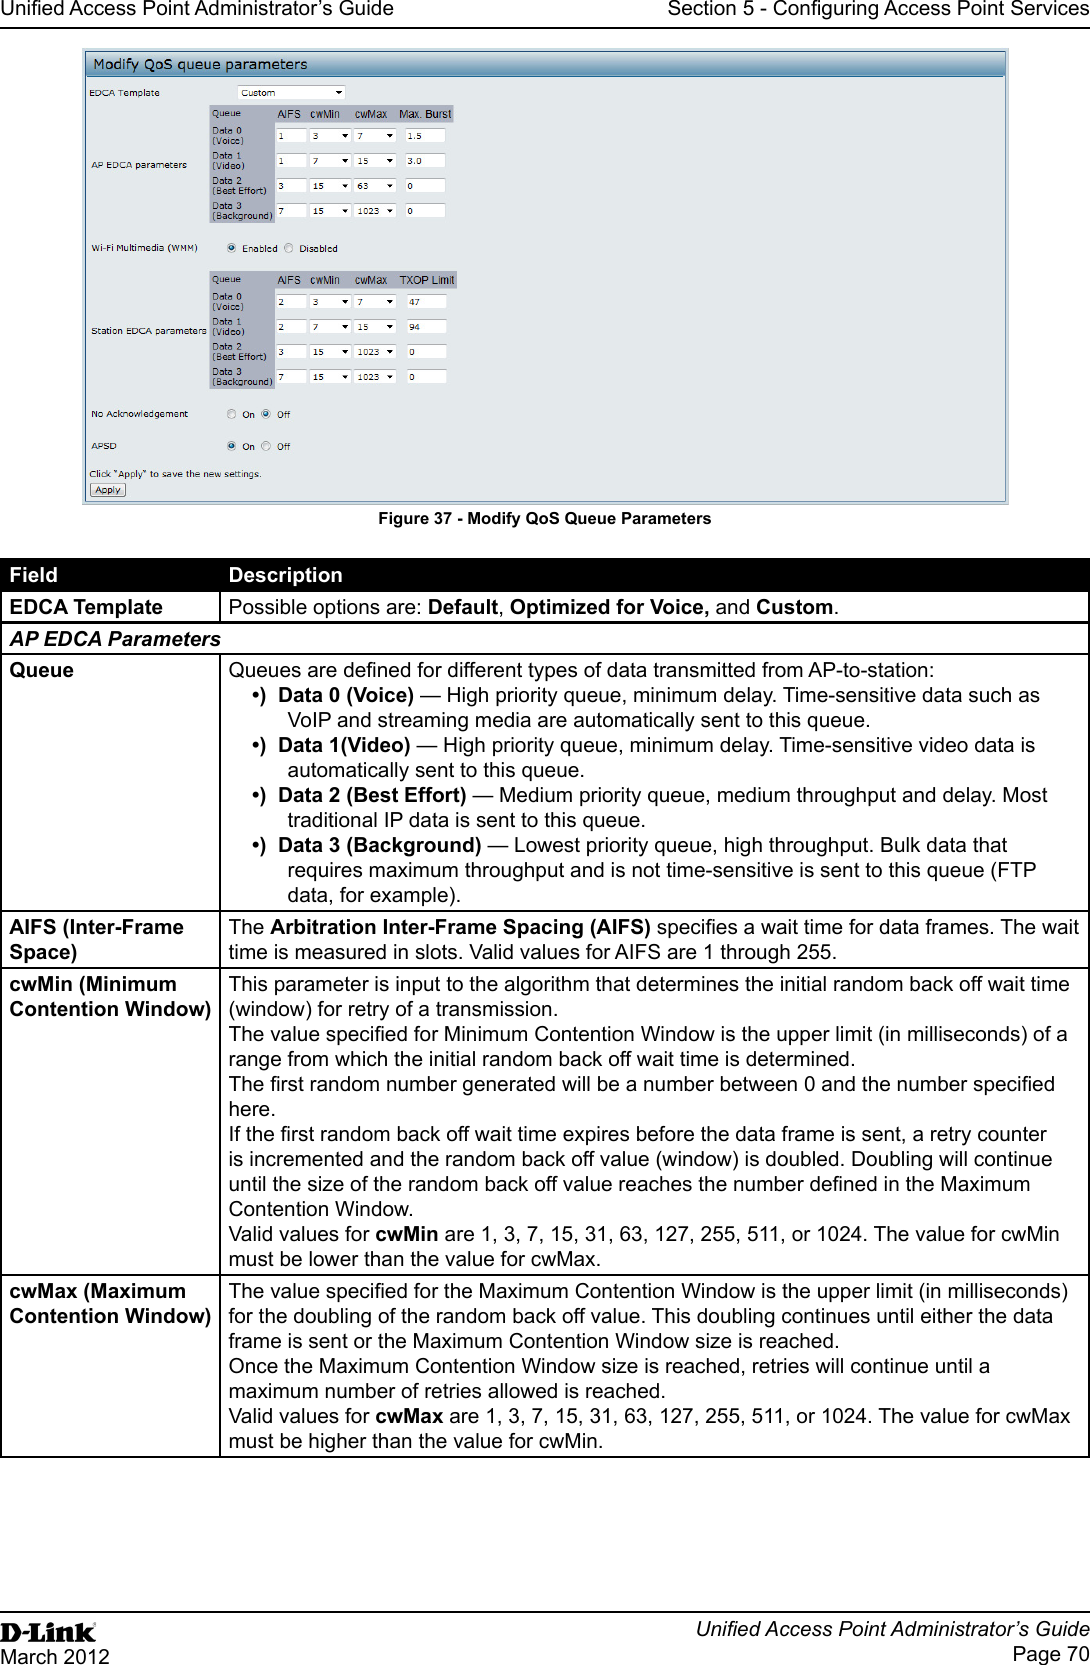 Unied Access Point Administrator’s GuideUnied Access Point Administrator’s GuidePage 70March 2012Section 5 - Conguring Access Point ServicesFigure 37 - Modify QoS Queue ParametersField DescriptionEDCA Template Possible options are: Default, Optimized for Voice, and Custom.AP EDCA ParametersQueue Queues are dened for different types of data transmitted from AP-to-station:•)  Data 0 (Voice) — High priority queue, minimum delay. Time-sensitive data such as VoIP and streaming media are automatically sent to this queue.•)  Data 1(Video) — High priority queue, minimum delay. Time-sensitive video data is automatically sent to this queue.•)  Data 2 (Best Effort) — Medium priority queue, medium throughput and delay. Most traditional IP data is sent to this queue.•)  Data 3 (Background) — Lowest priority queue, high throughput. Bulk data that requires maximum throughput and is not time-sensitive is sent to this queue (FTP data, for example).AIFS (Inter-Frame Space)The Arbitration Inter-Frame Spacing (AIFS) species a wait time for data frames. The wait time is measured in slots. Valid values for AIFS are 1 through 255.cwMin (Minimum Contention Window)This parameter is input to the algorithm that determines the initial random back off wait time (window) for retry of a transmission. The value specied for Minimum Contention Window is the upper limit (in milliseconds) of a range from which the initial random back off wait time is determined.The rst random number generated will be a number between 0 and the number specied here.If the rst random back off wait time expires before the data frame is sent, a retry counter is incremented and the random back off value (window) is doubled. Doubling will continue until the size of the random back off value reaches the number dened in the Maximum Contention Window.Valid values for cwMin are 1, 3, 7, 15, 31, 63, 127, 255, 511, or 1024. The value for cwMin must be lower than the value for cwMax.cwMax (Maximum Contention Window)The value specied for the Maximum Contention Window is the upper limit (in milliseconds) for the doubling of the random back off value. This doubling continues until either the data frame is sent or the Maximum Contention Window size is reached.Once the Maximum Contention Window size is reached, retries will continue until a maximum number of retries allowed is reached.Valid values for cwMax are 1, 3, 7, 15, 31, 63, 127, 255, 511, or 1024. The value for cwMax must be higher than the value for cwMin.